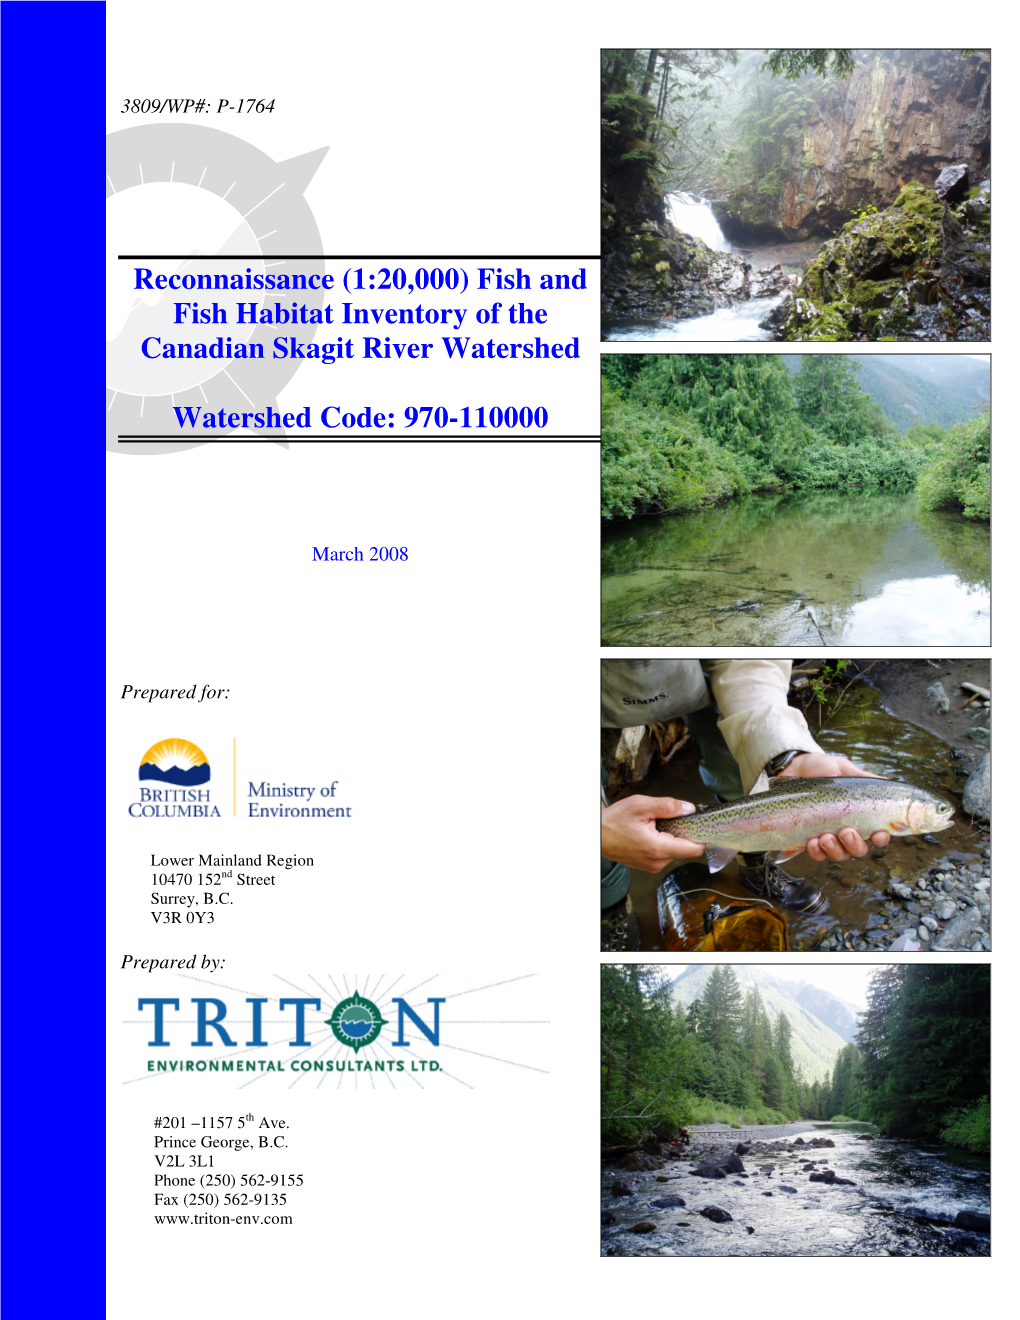 Reconnaissance (1:20,000) Fish and Fish Habitat Inventory of the Canadian Skagit River Watershed